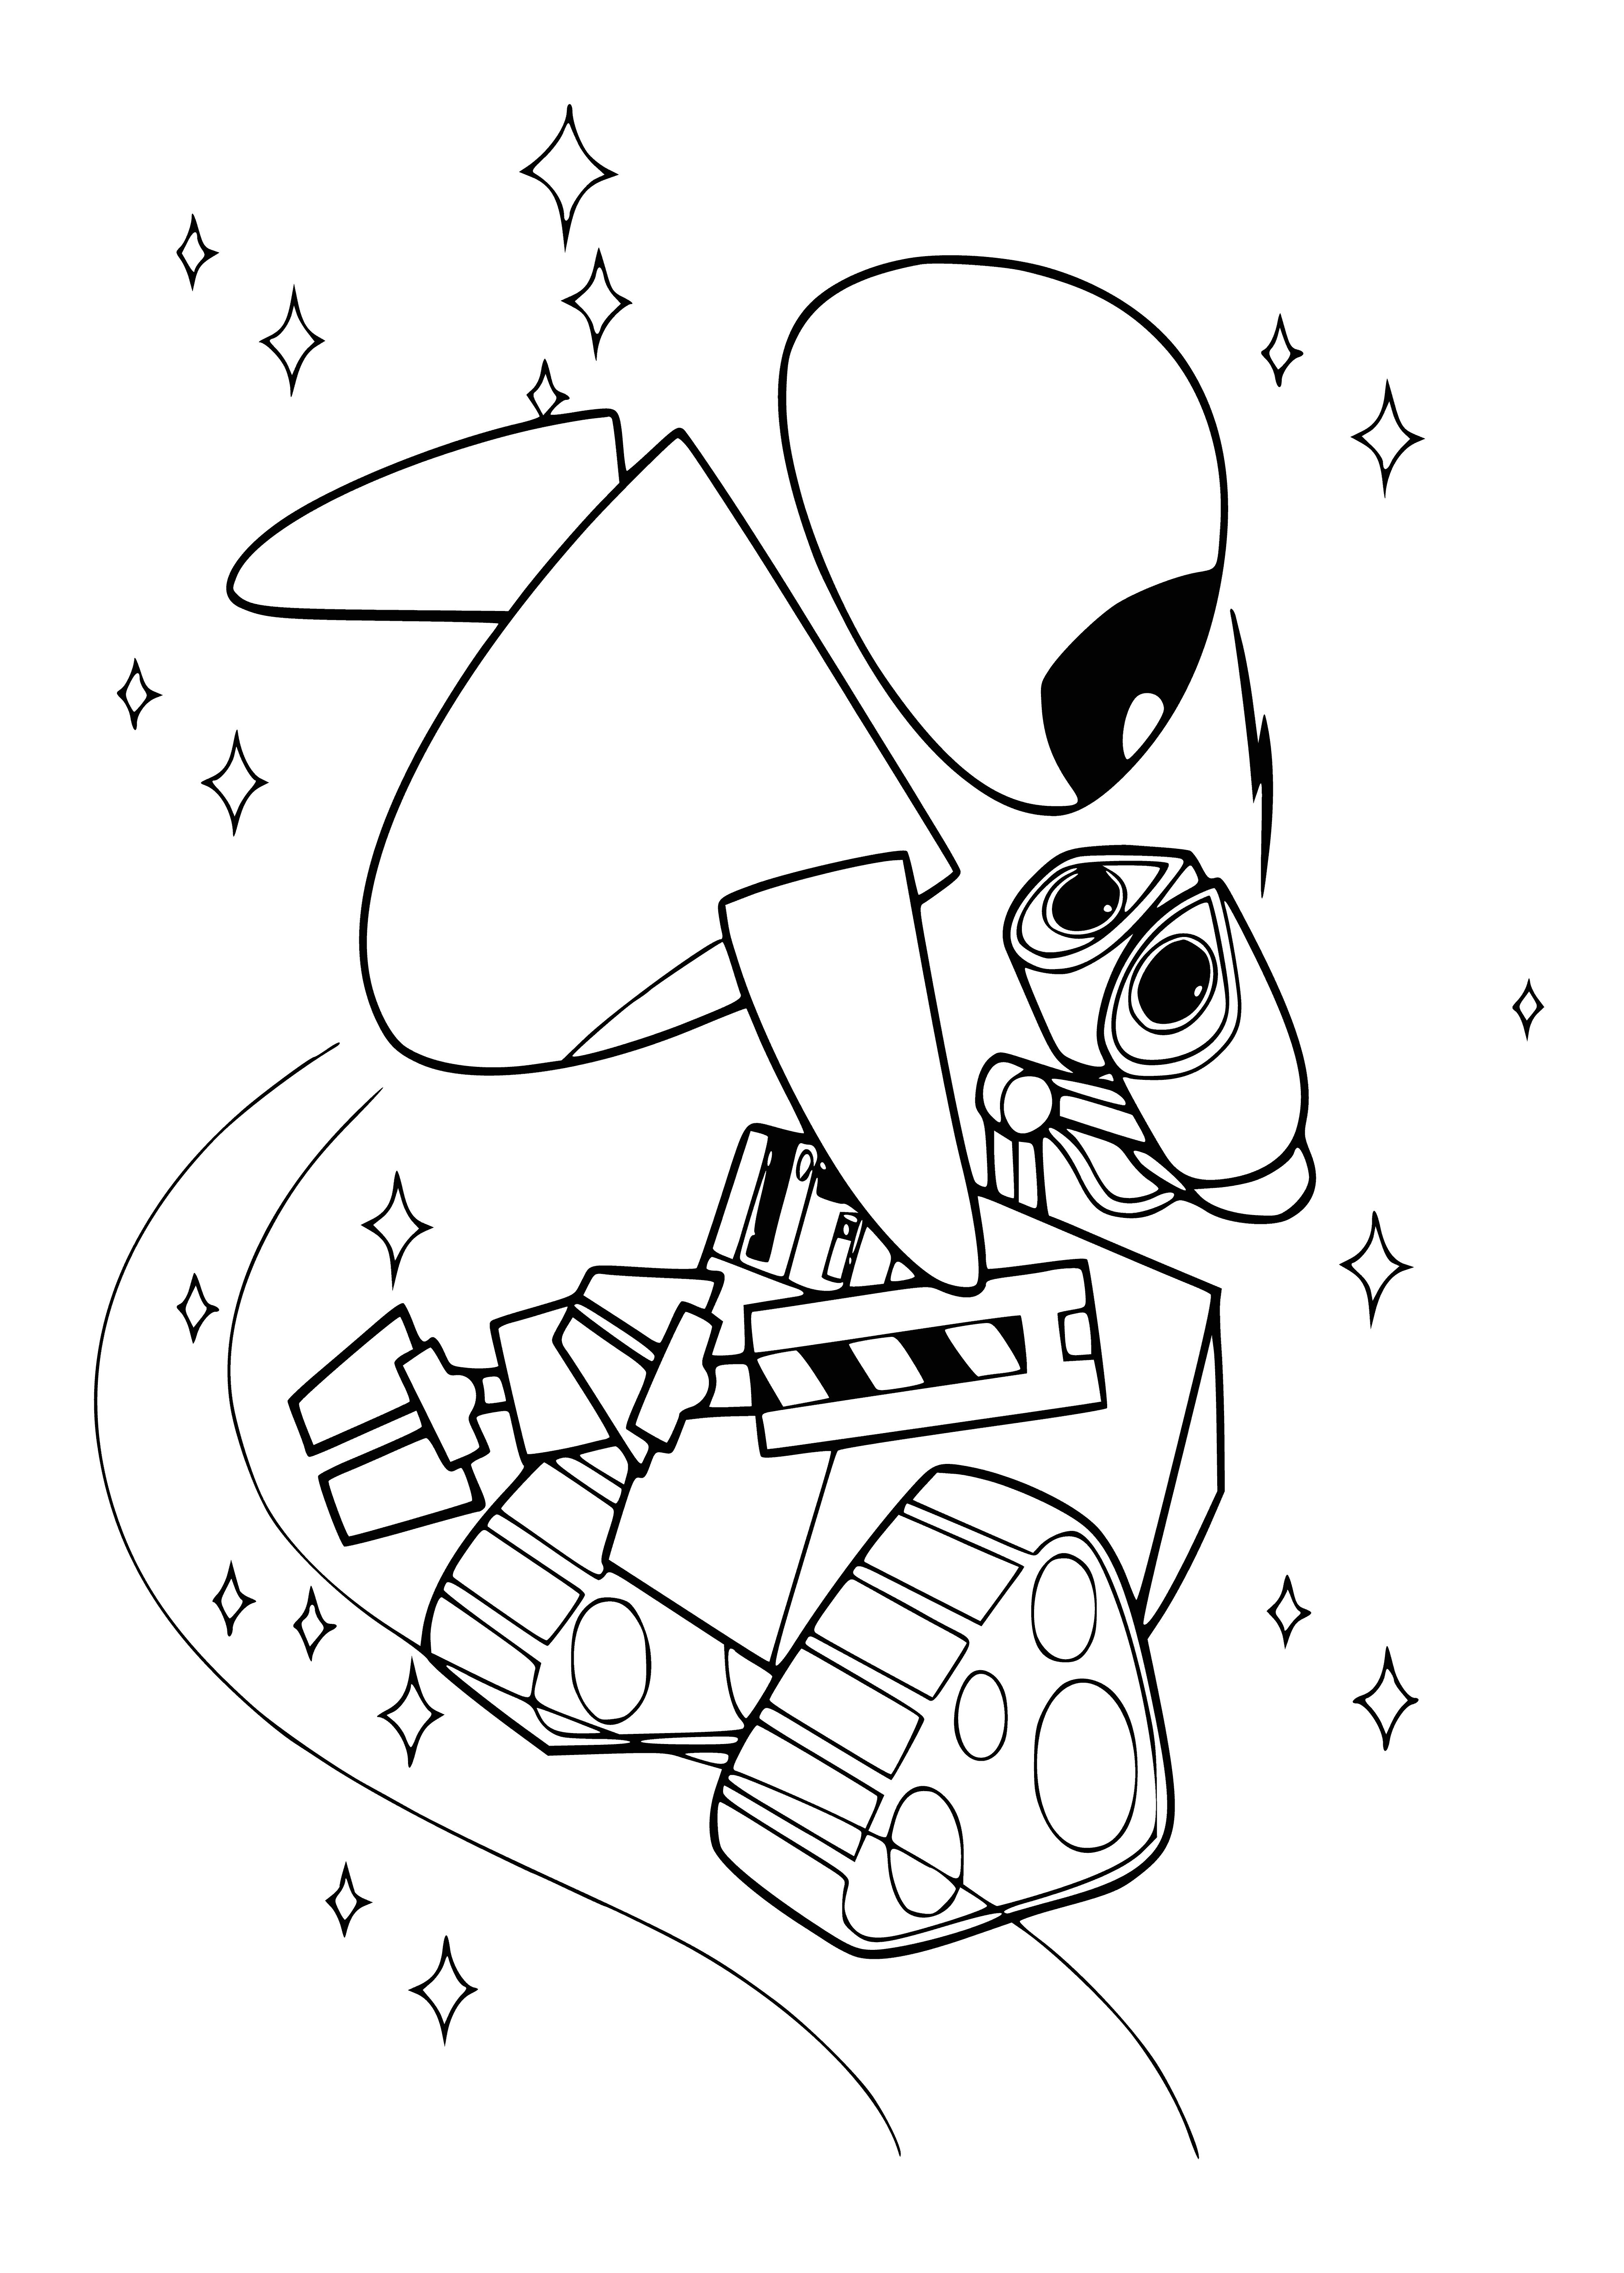 Cosmic dance coloring page